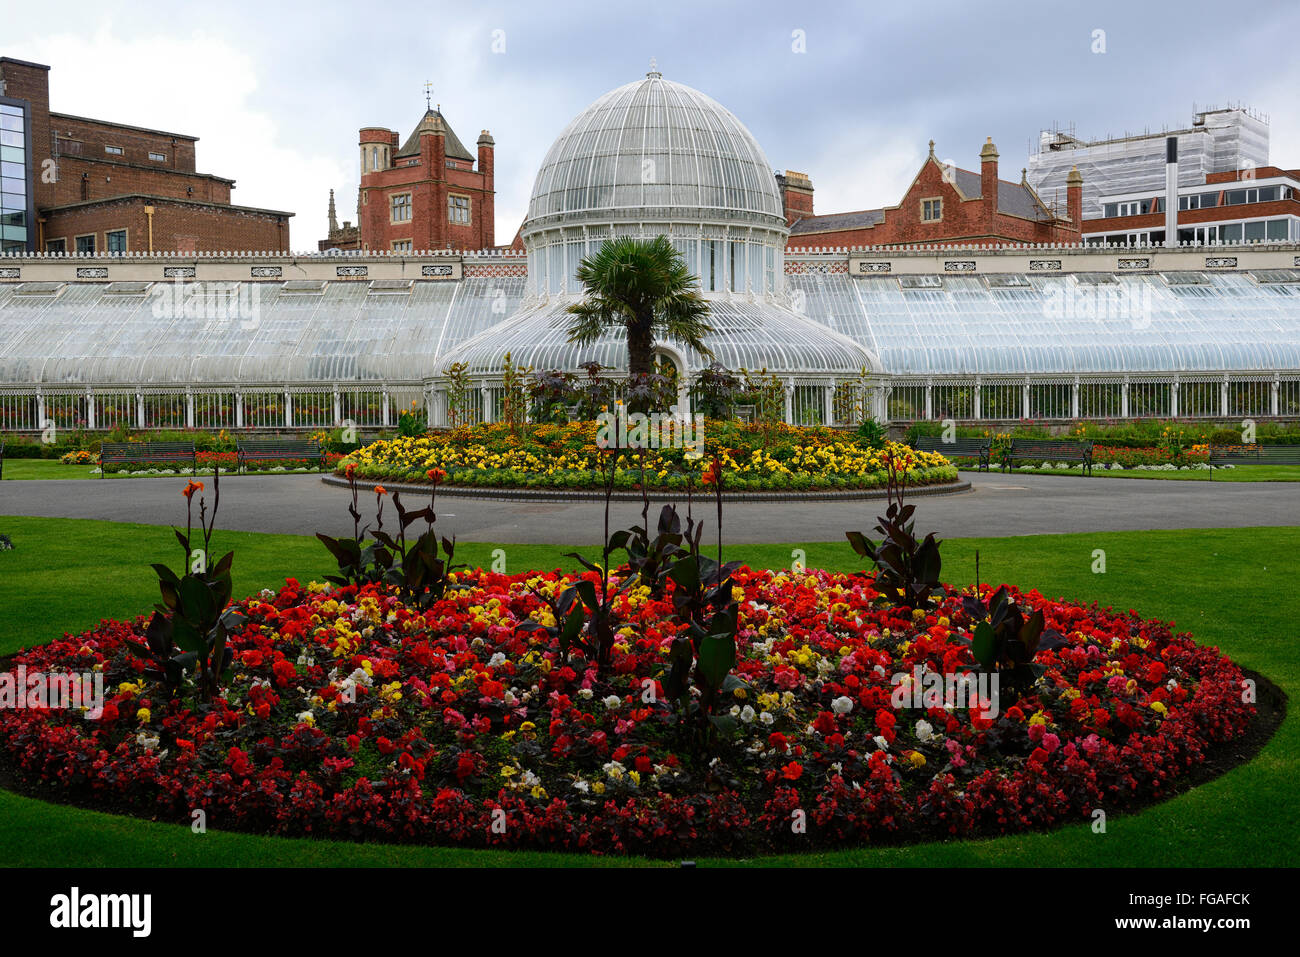 Belfast Botanical Gardens Palm House Glass house bedding border bed display round circular beds annual annuals colour RM Floral Stock Photo